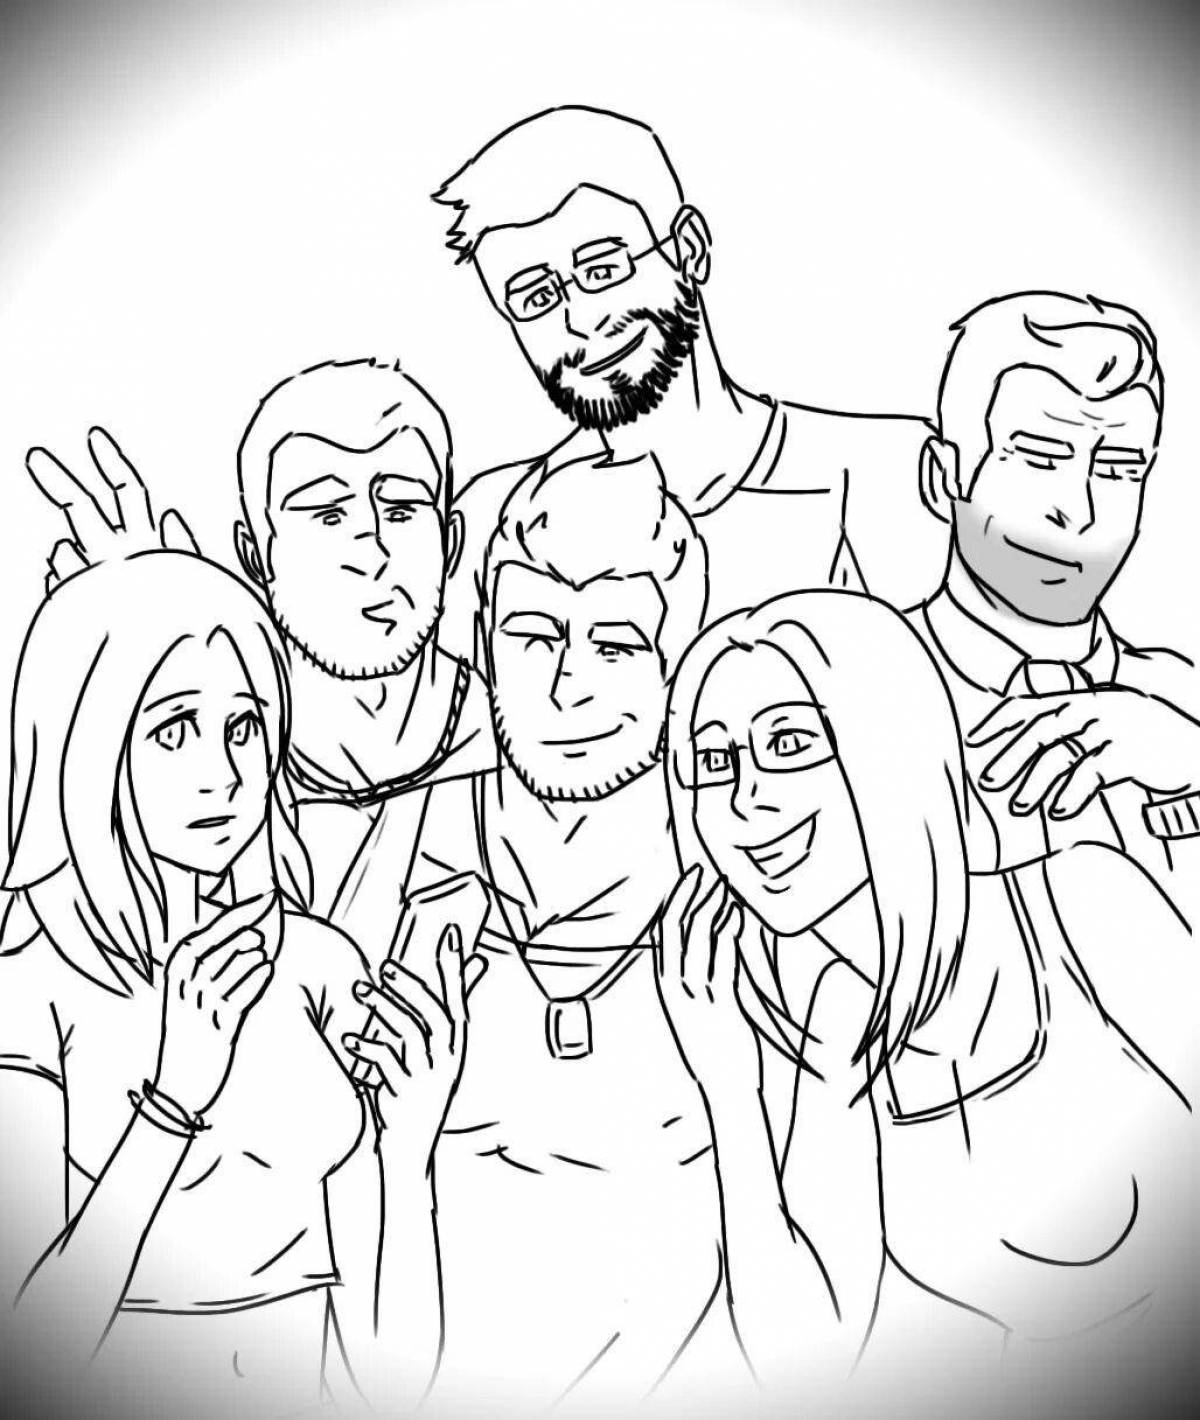 Attractive sims 4 coloring book